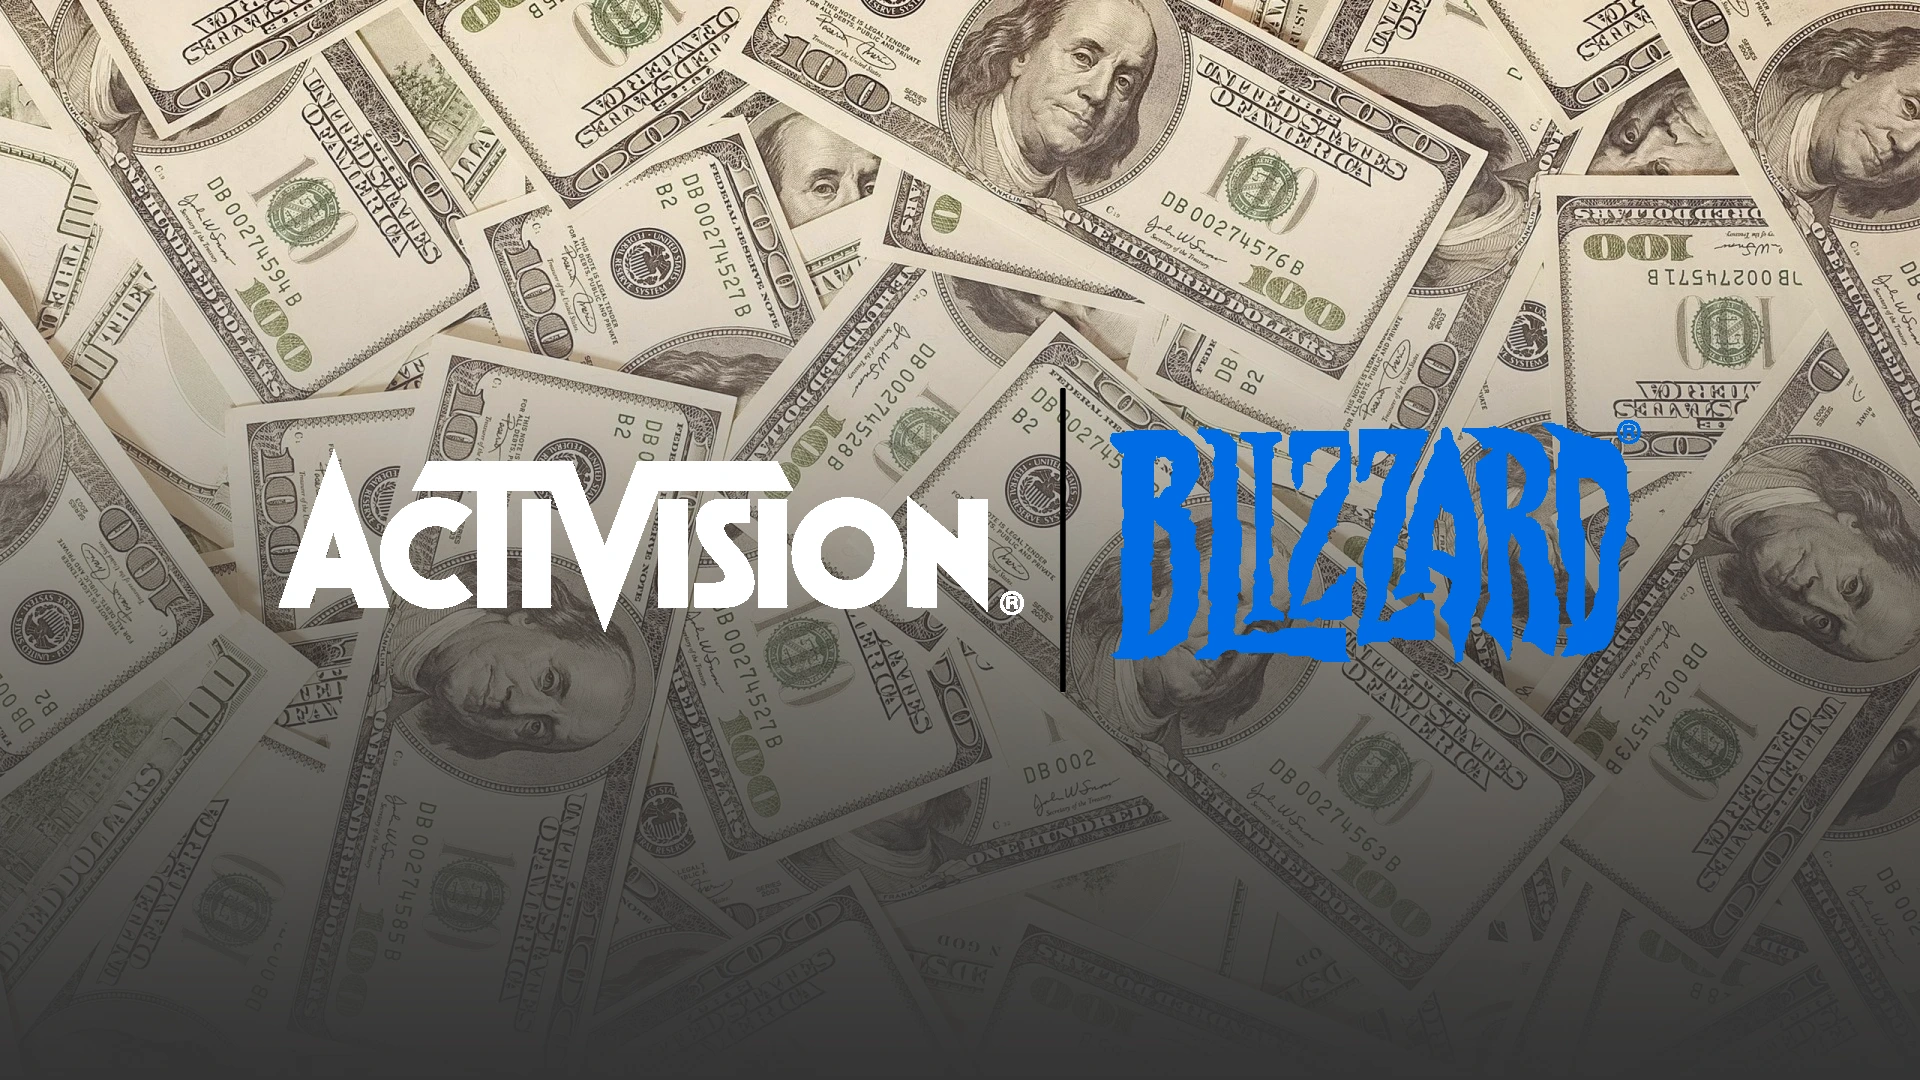 Microsoft isn't going to acquire Activision Blizzard for $68.7 billion